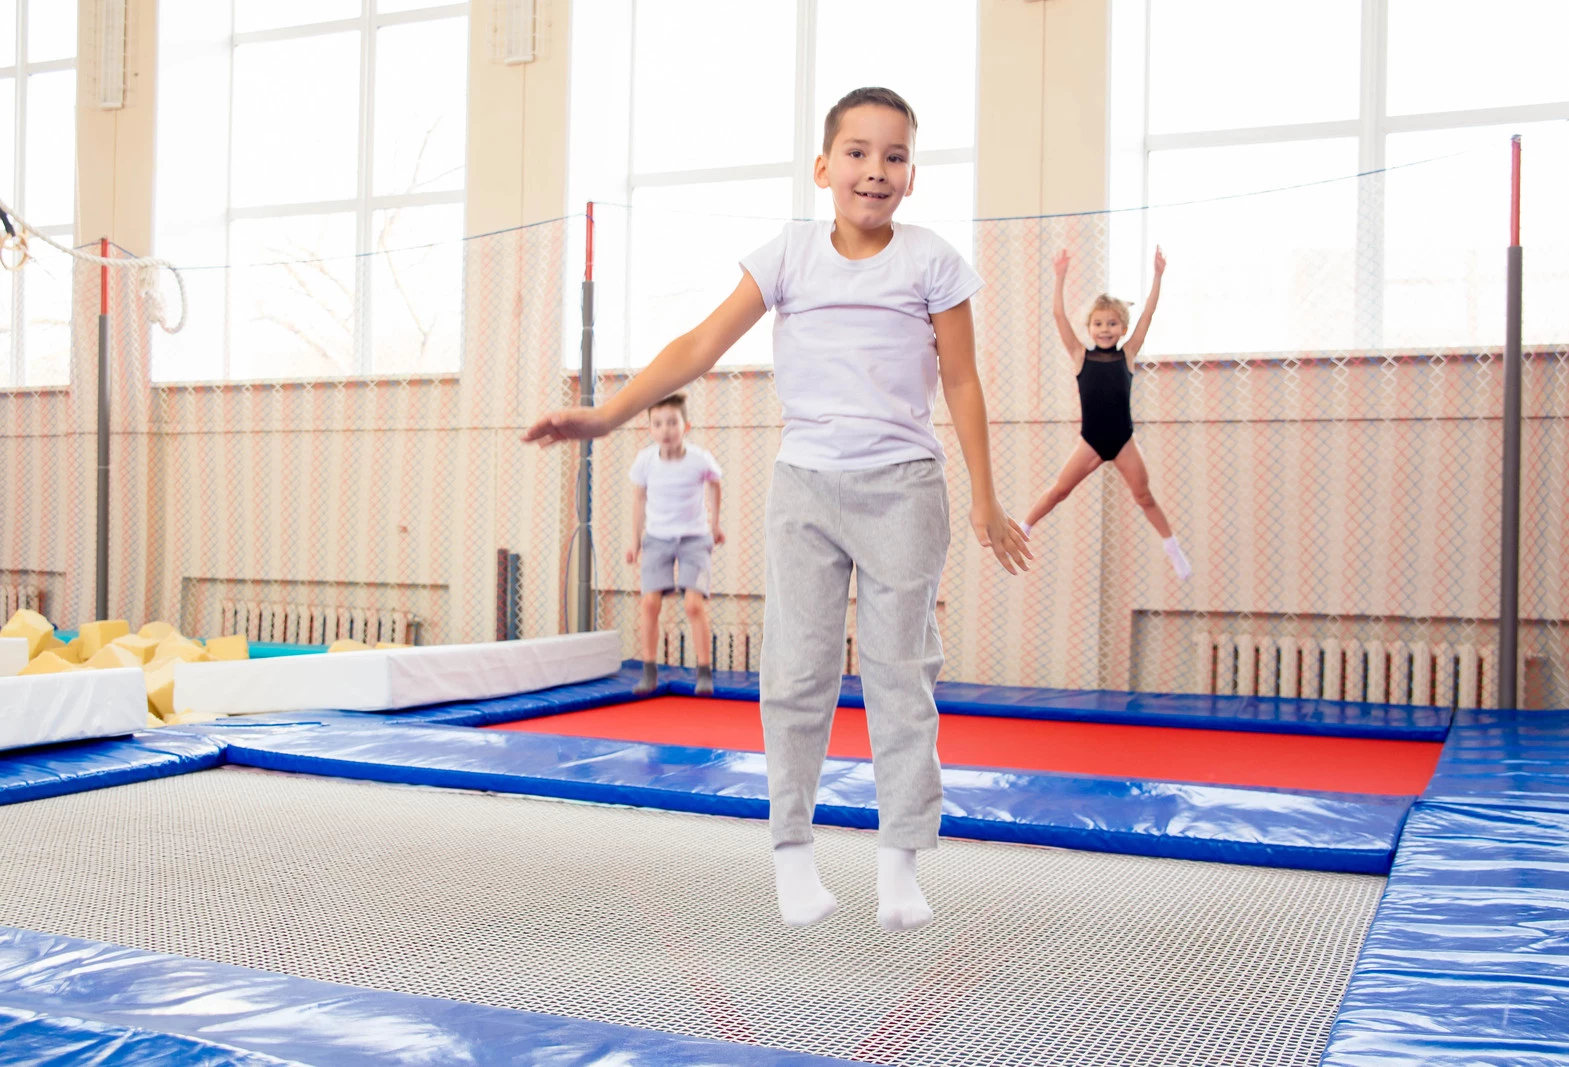 Idaho Indoor Activities: A Look at Boise's Four Trampoline Parks